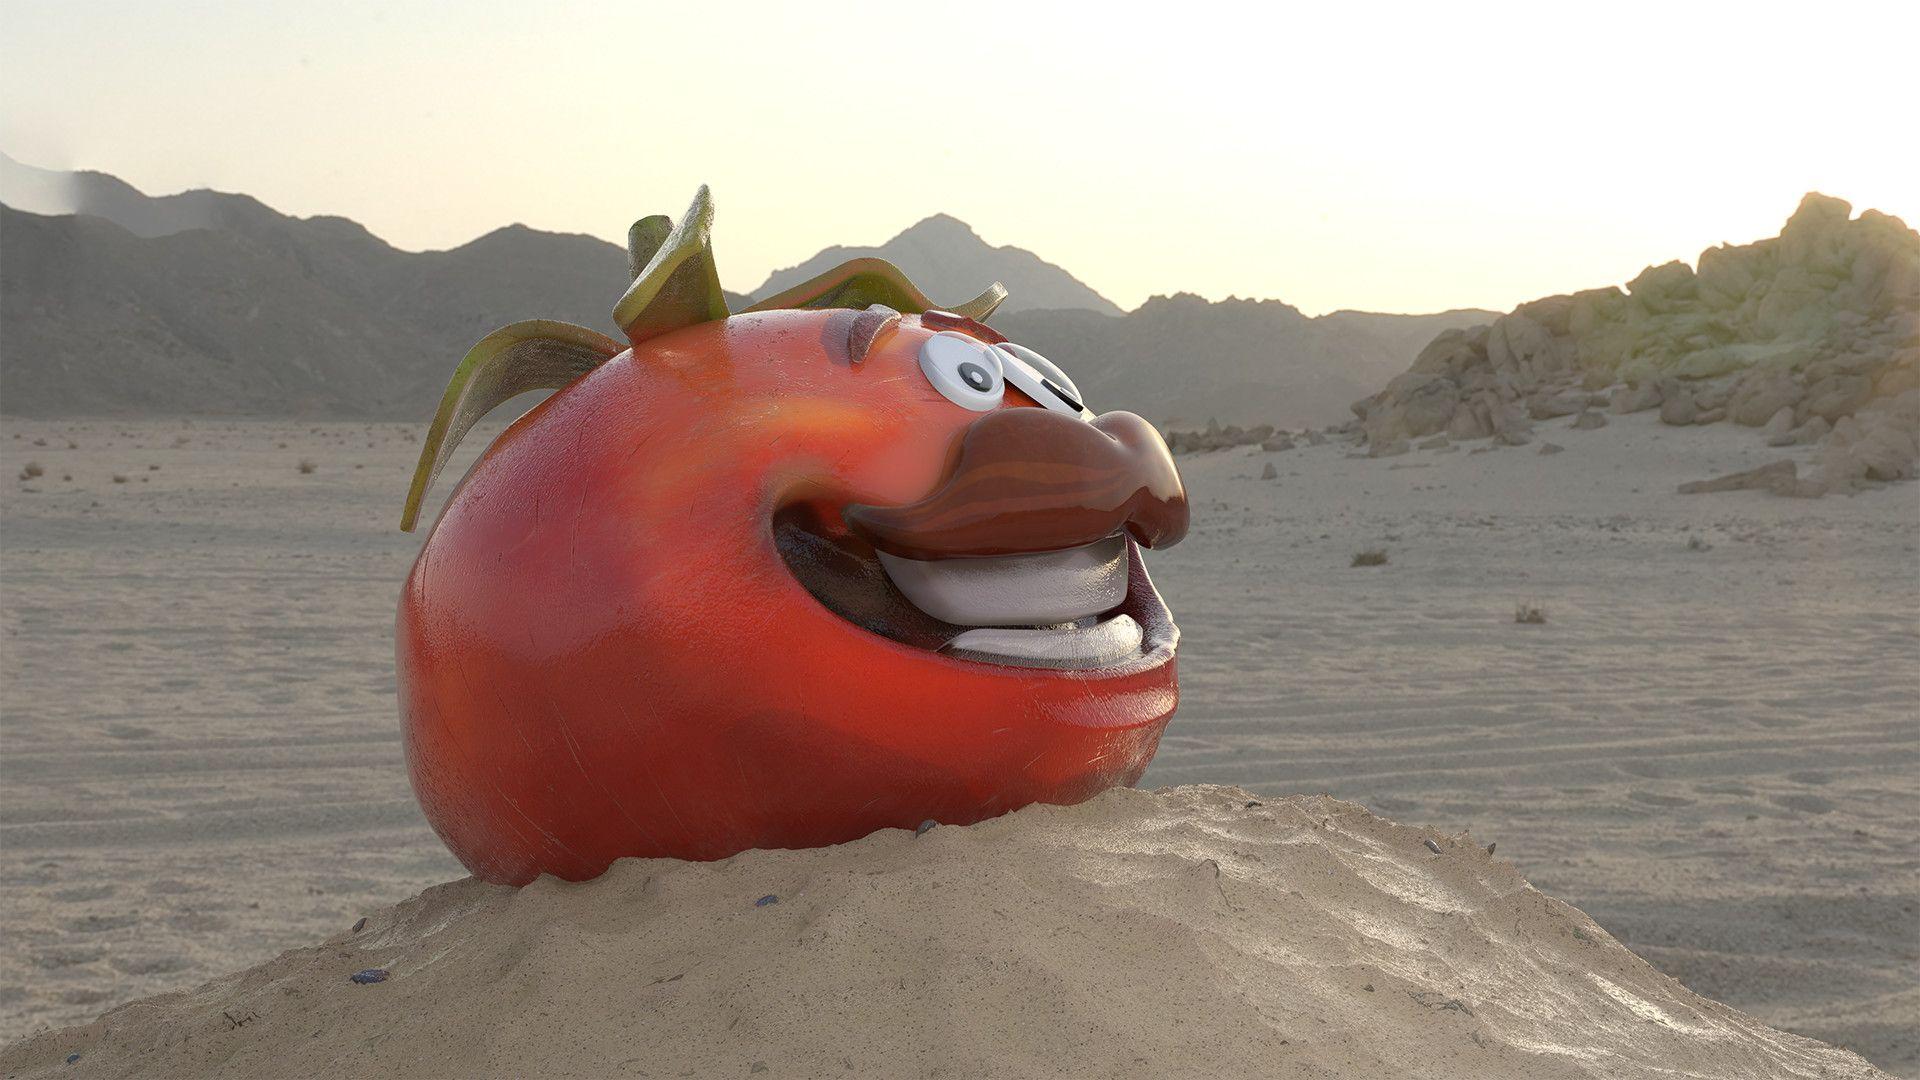 Tomato Head Found In the Desert, Roee